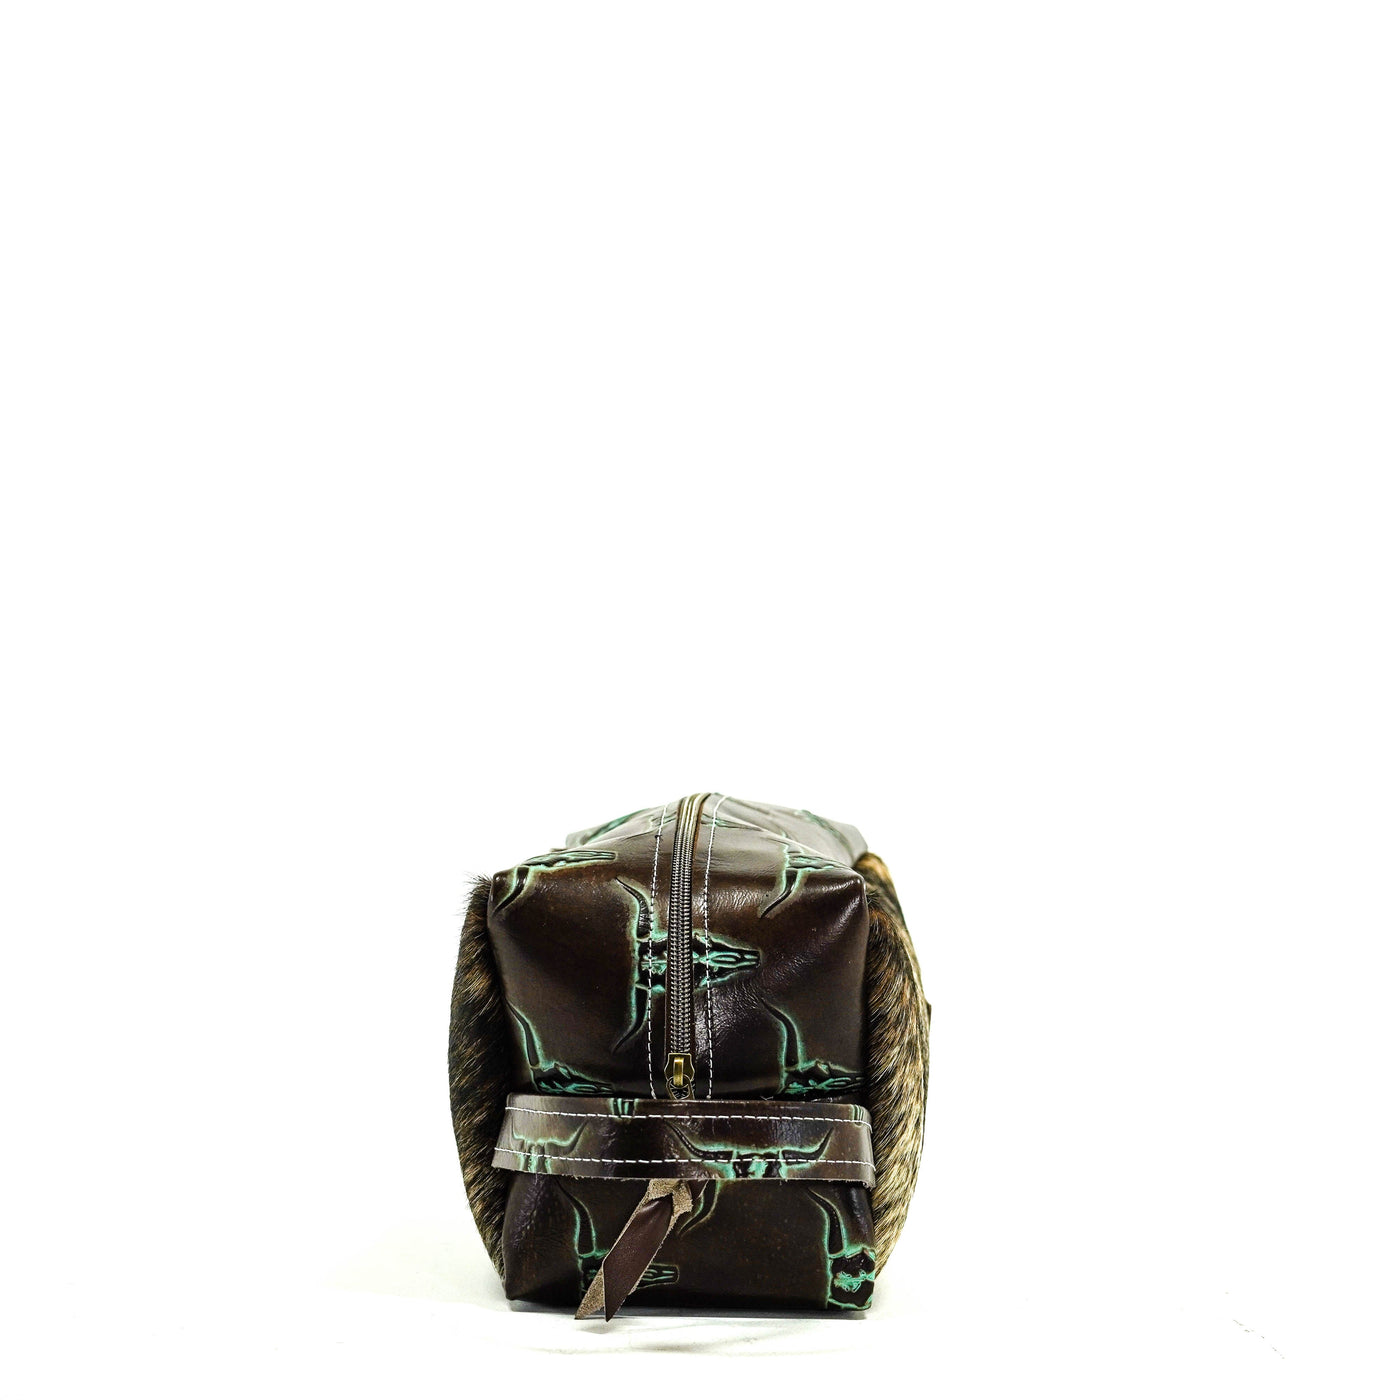 Dutton - Two-Tone Brindle w/ Mint Chocolate Skulls-Dutton-Western-Cowhide-Bags-Handmade-Products-Gifts-Dancing Cactus Designs